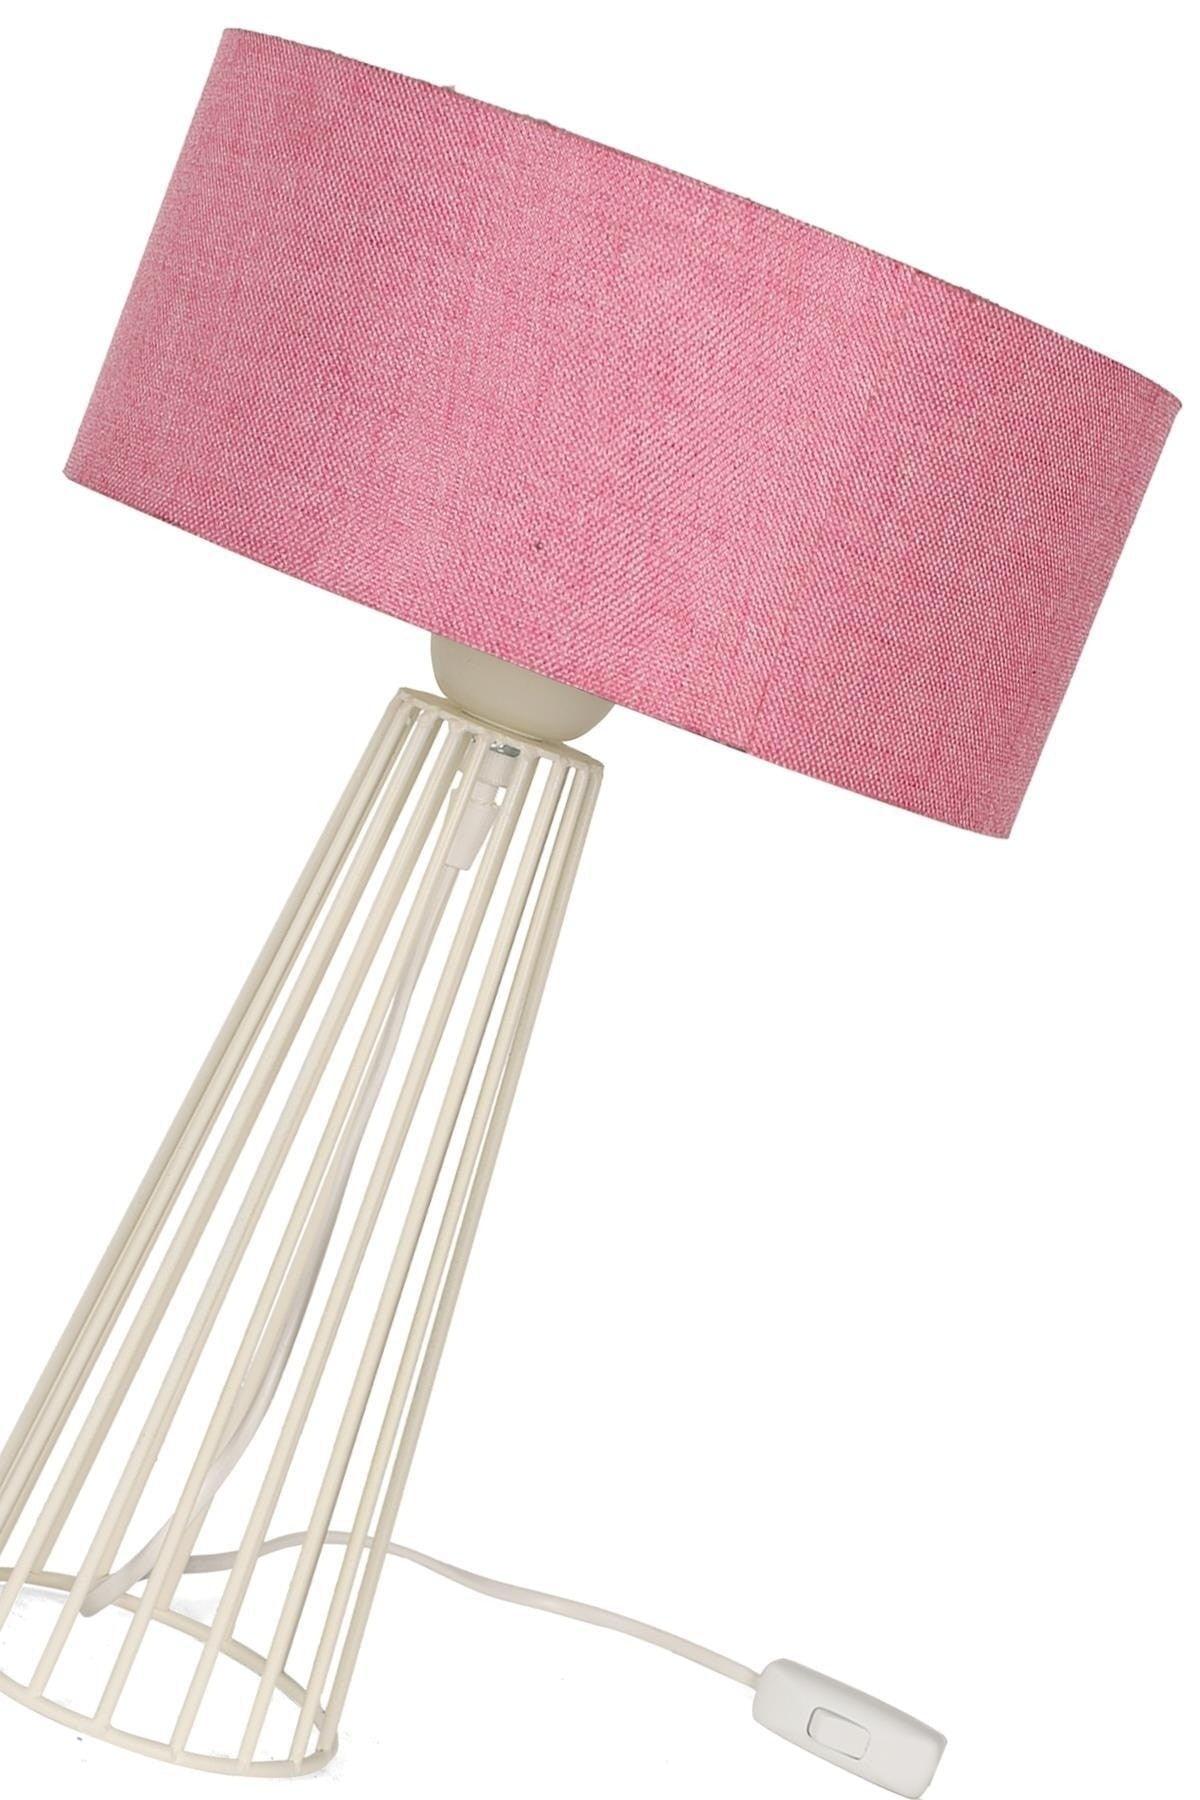 Philippine Table Lamp White Pink Hat - Swordslife